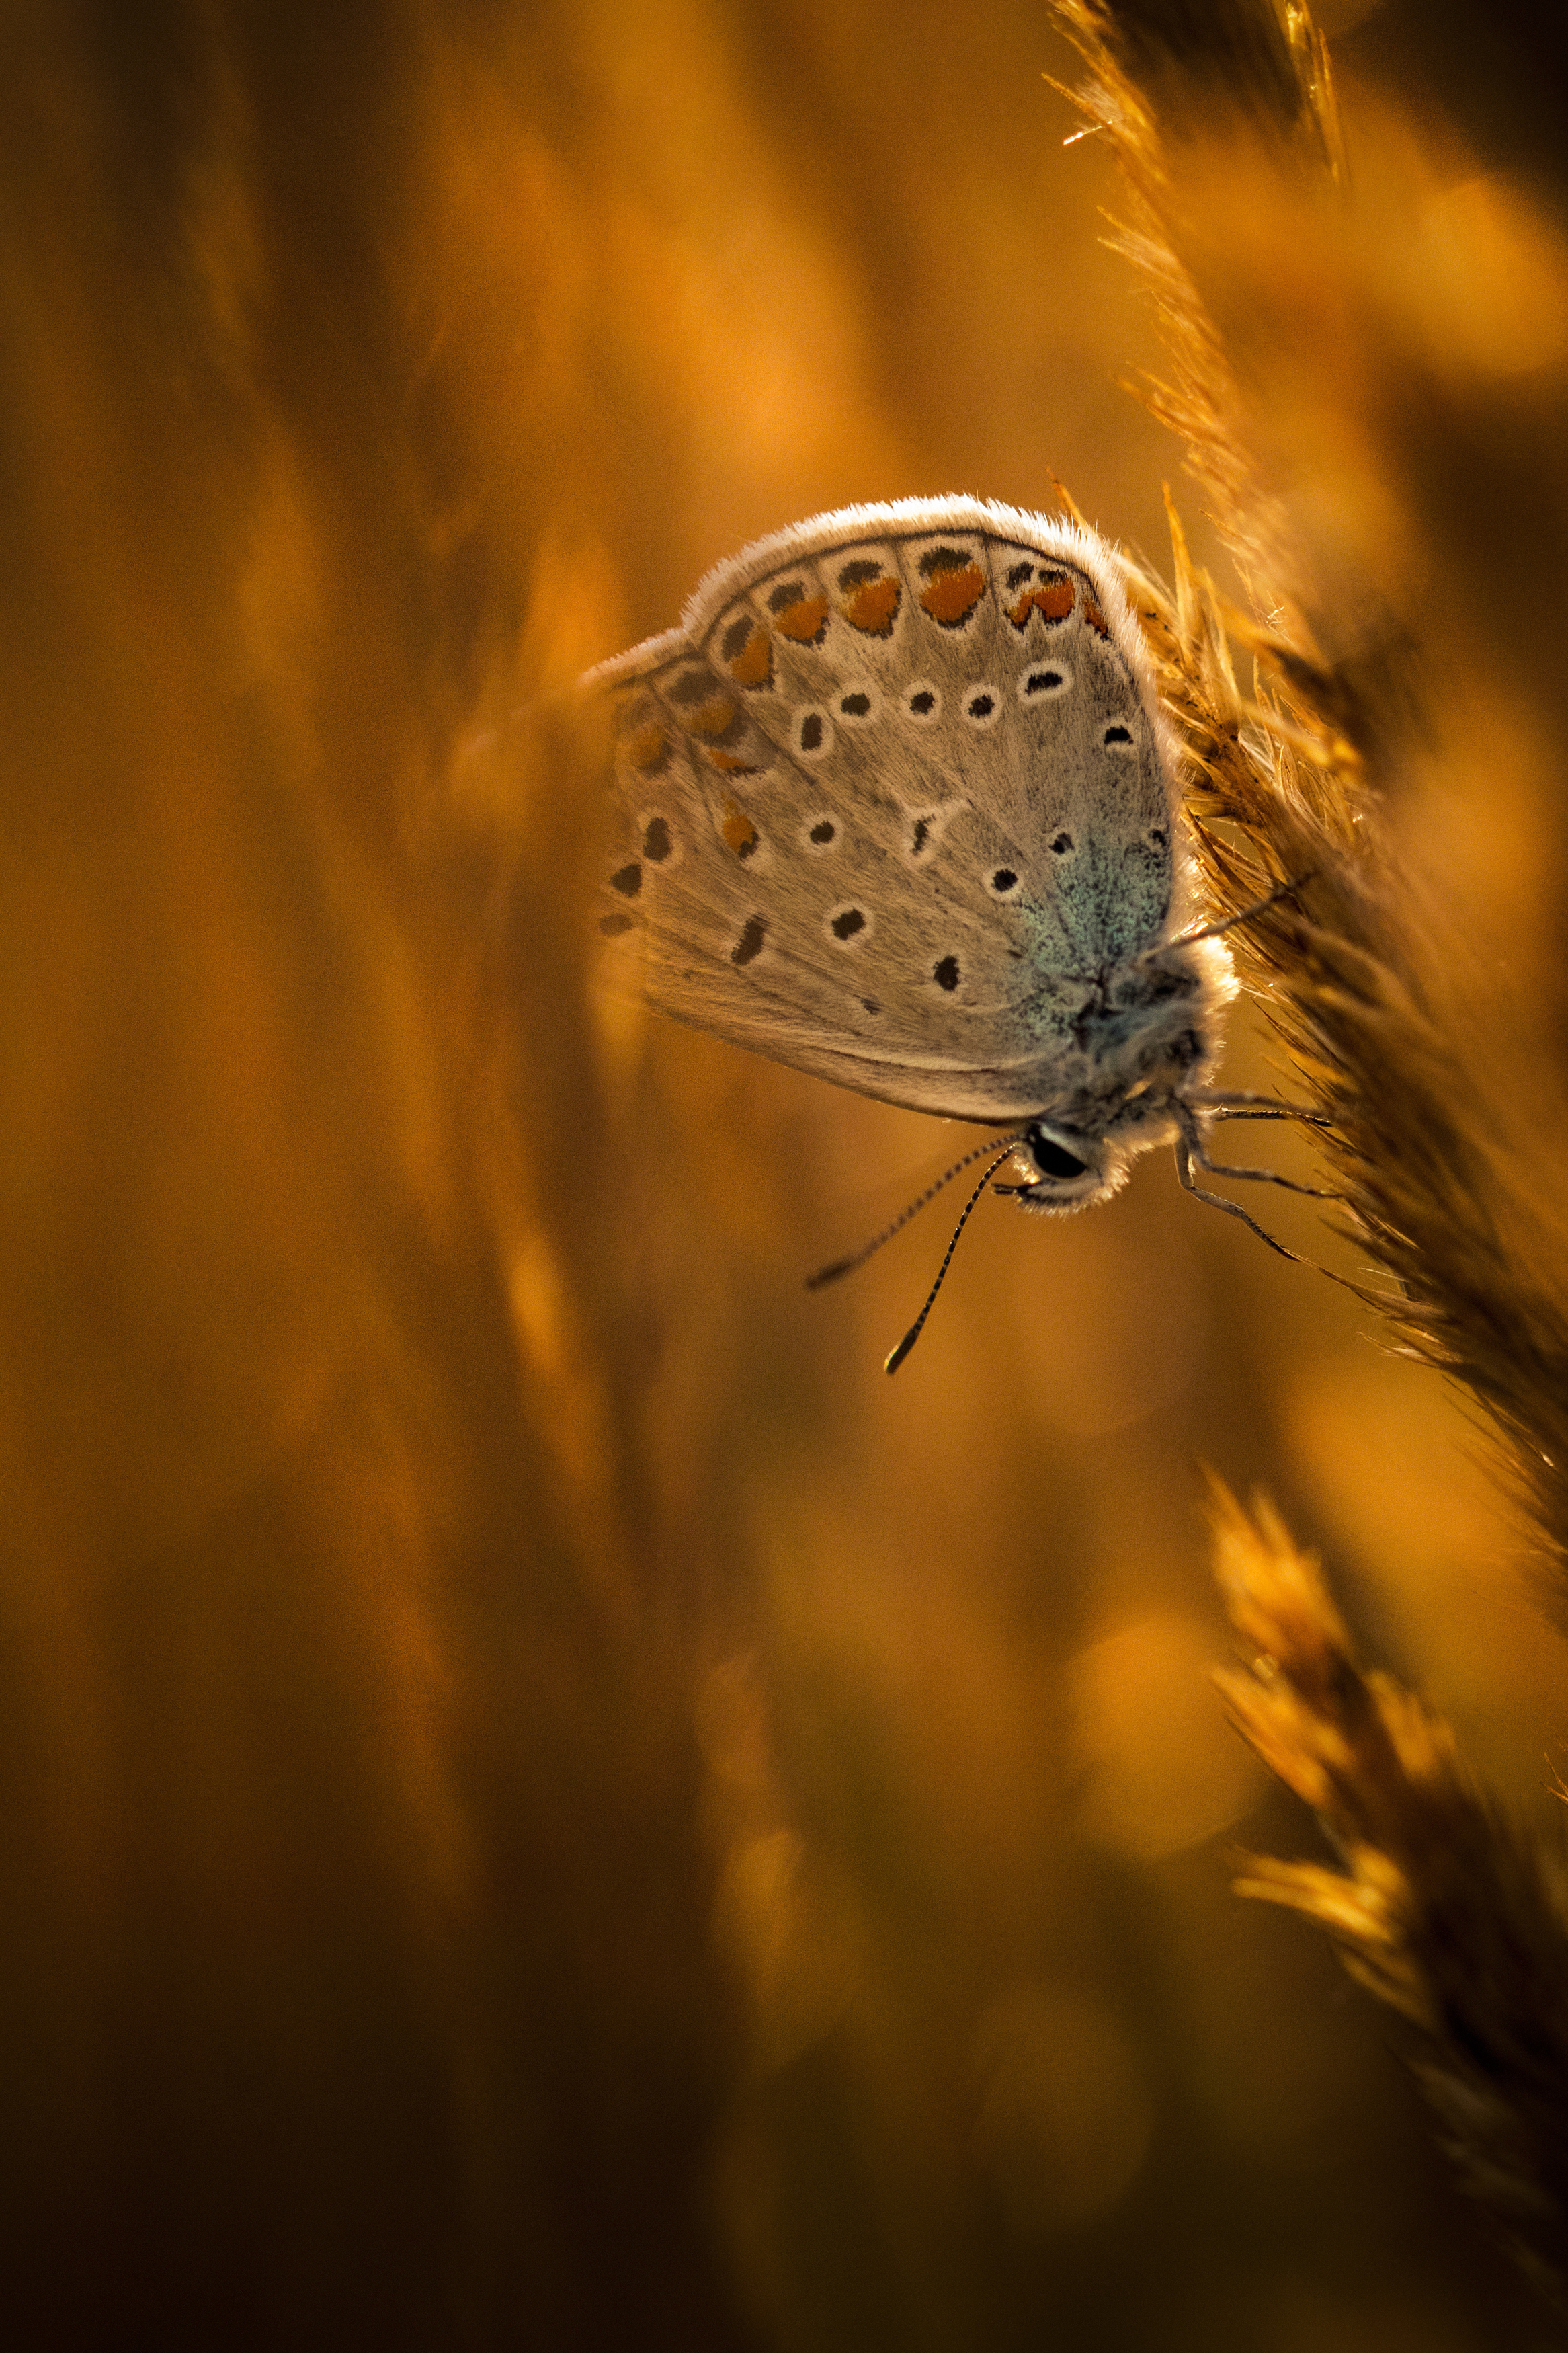 Butterfly , Insect, Nature, Close-up, Summer, Grass, Plant, Meadow, Animal, Wildlife, macro, macrophotography, bokeh, Damian Cyfka